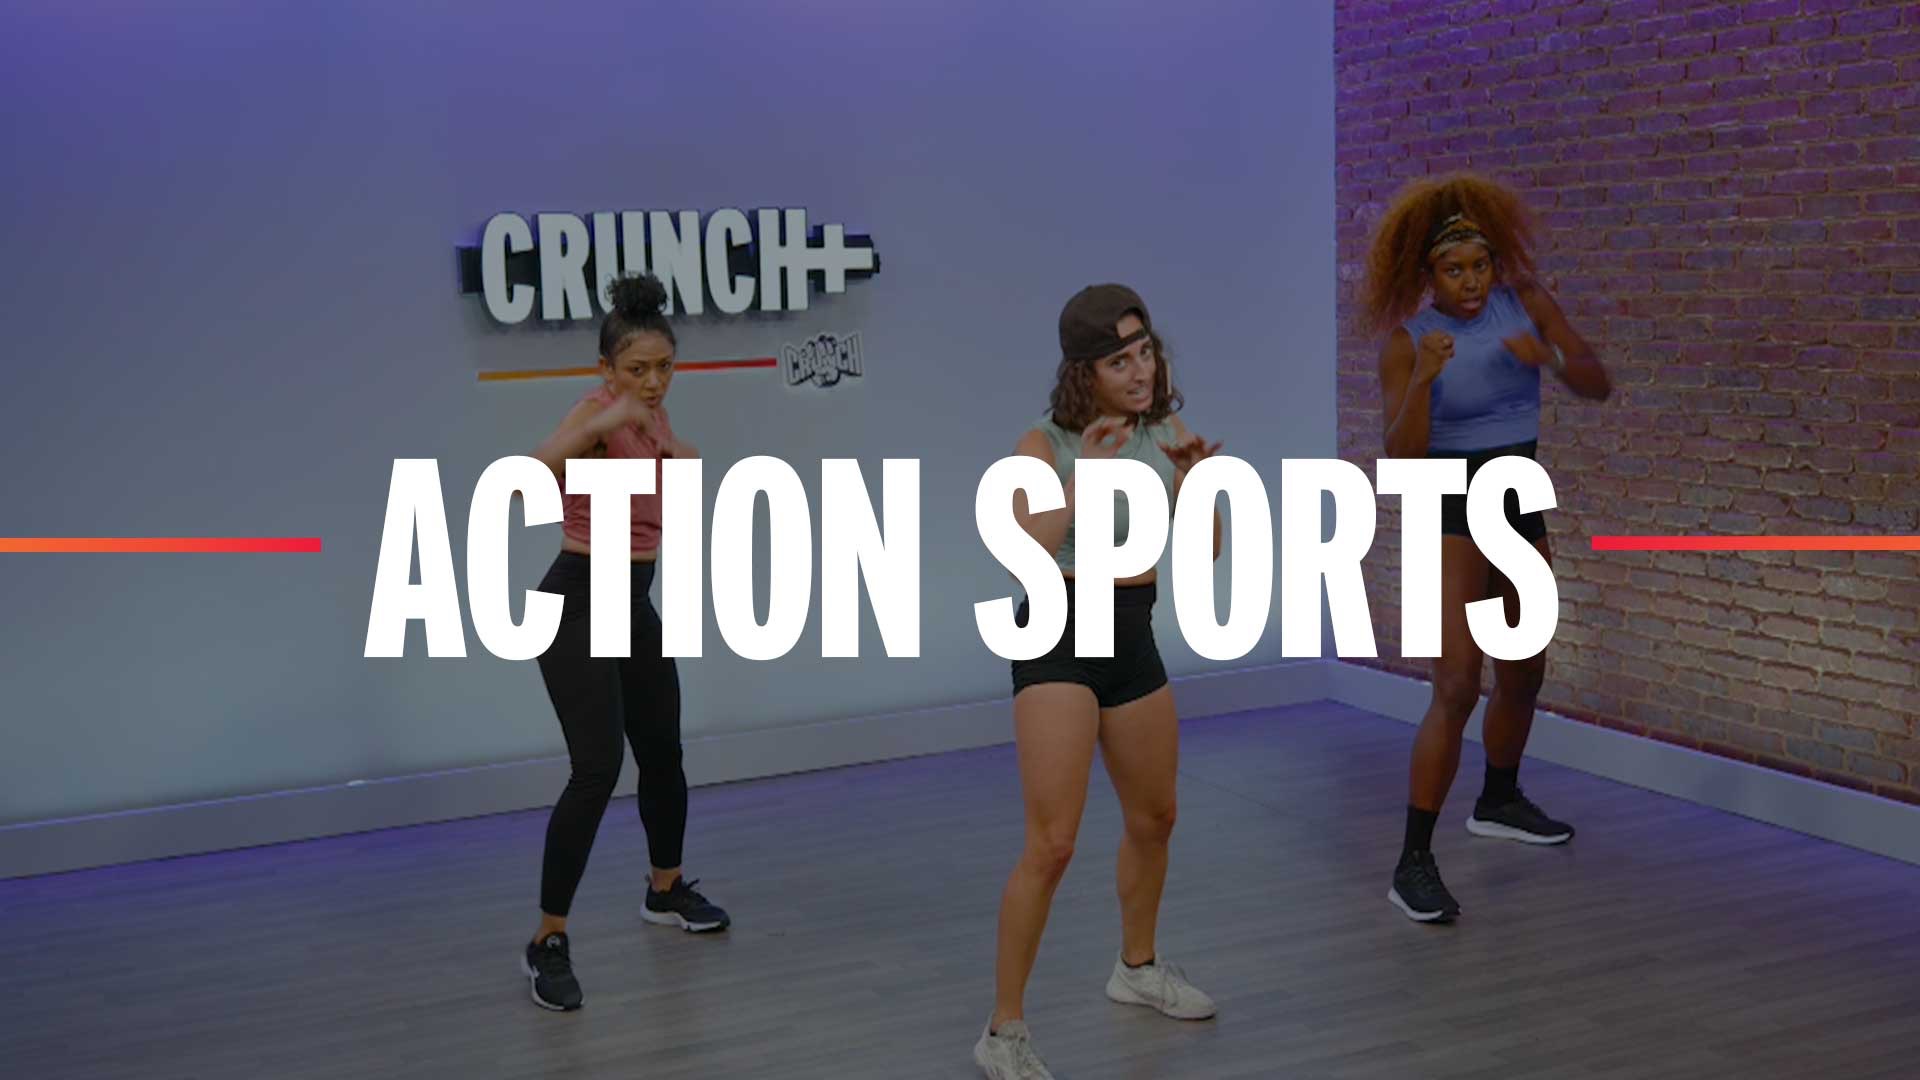 Action Sports by Crunch+